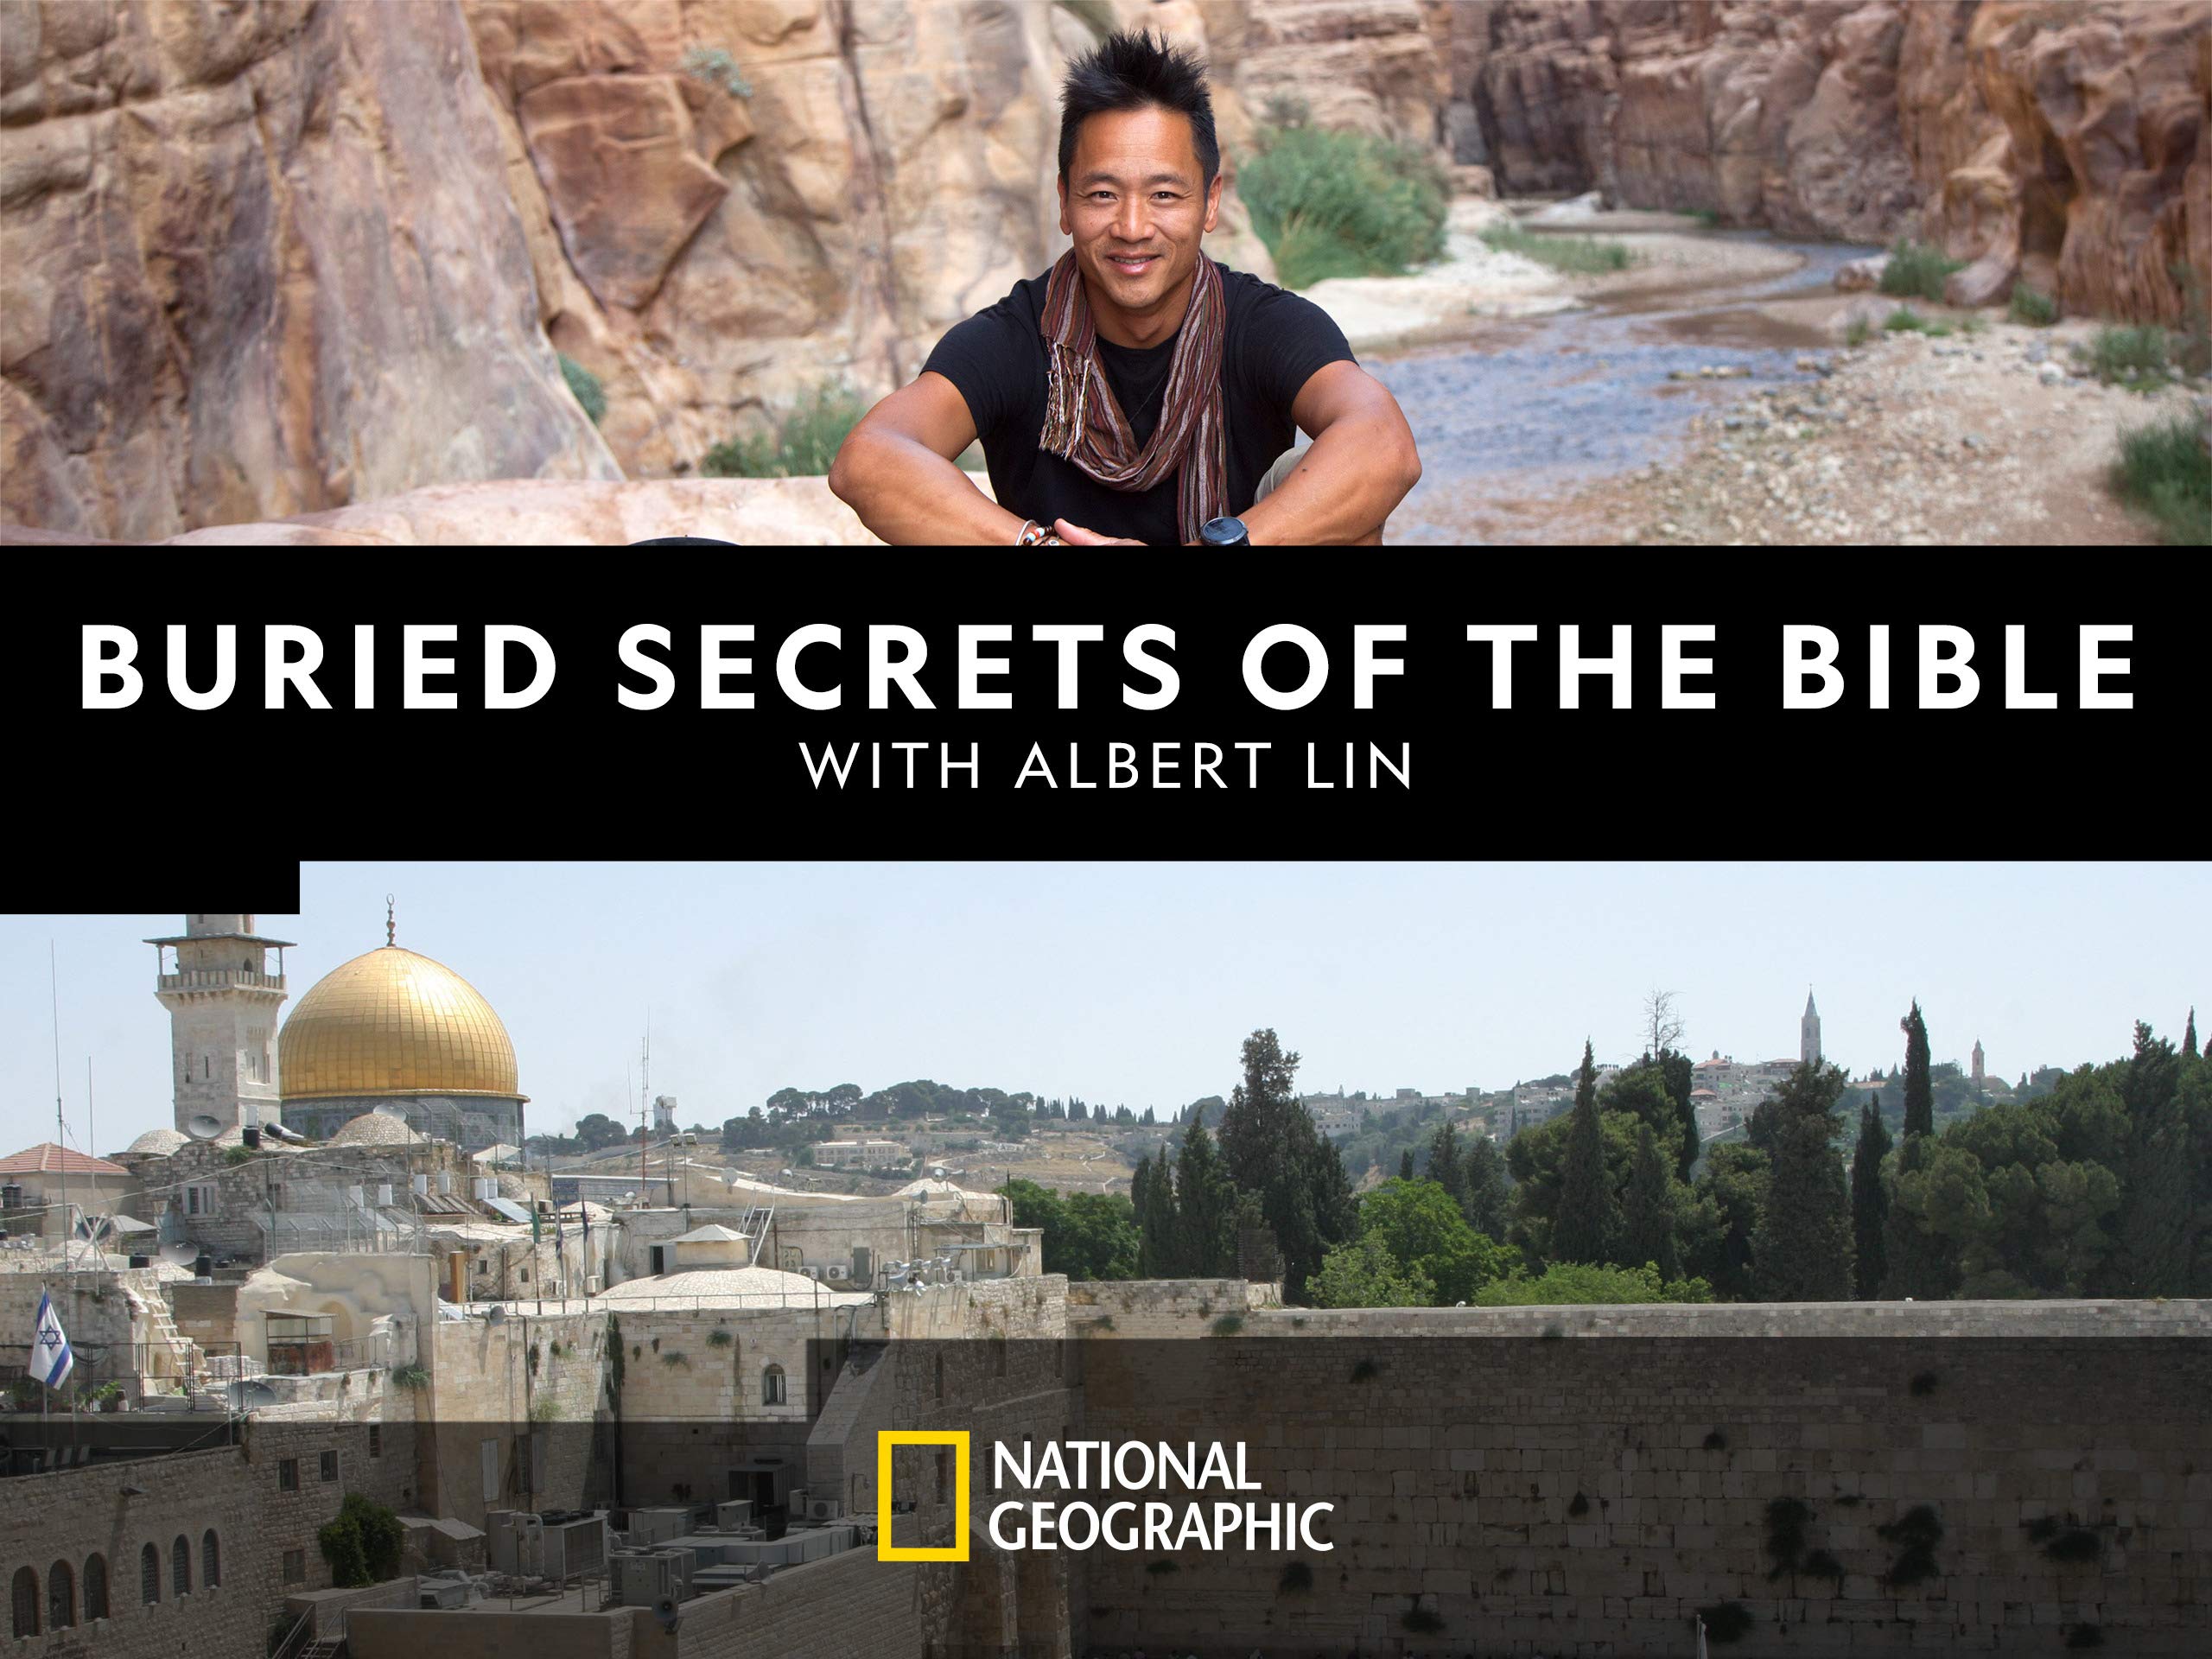 National Geographic - Buried secrets of the bible